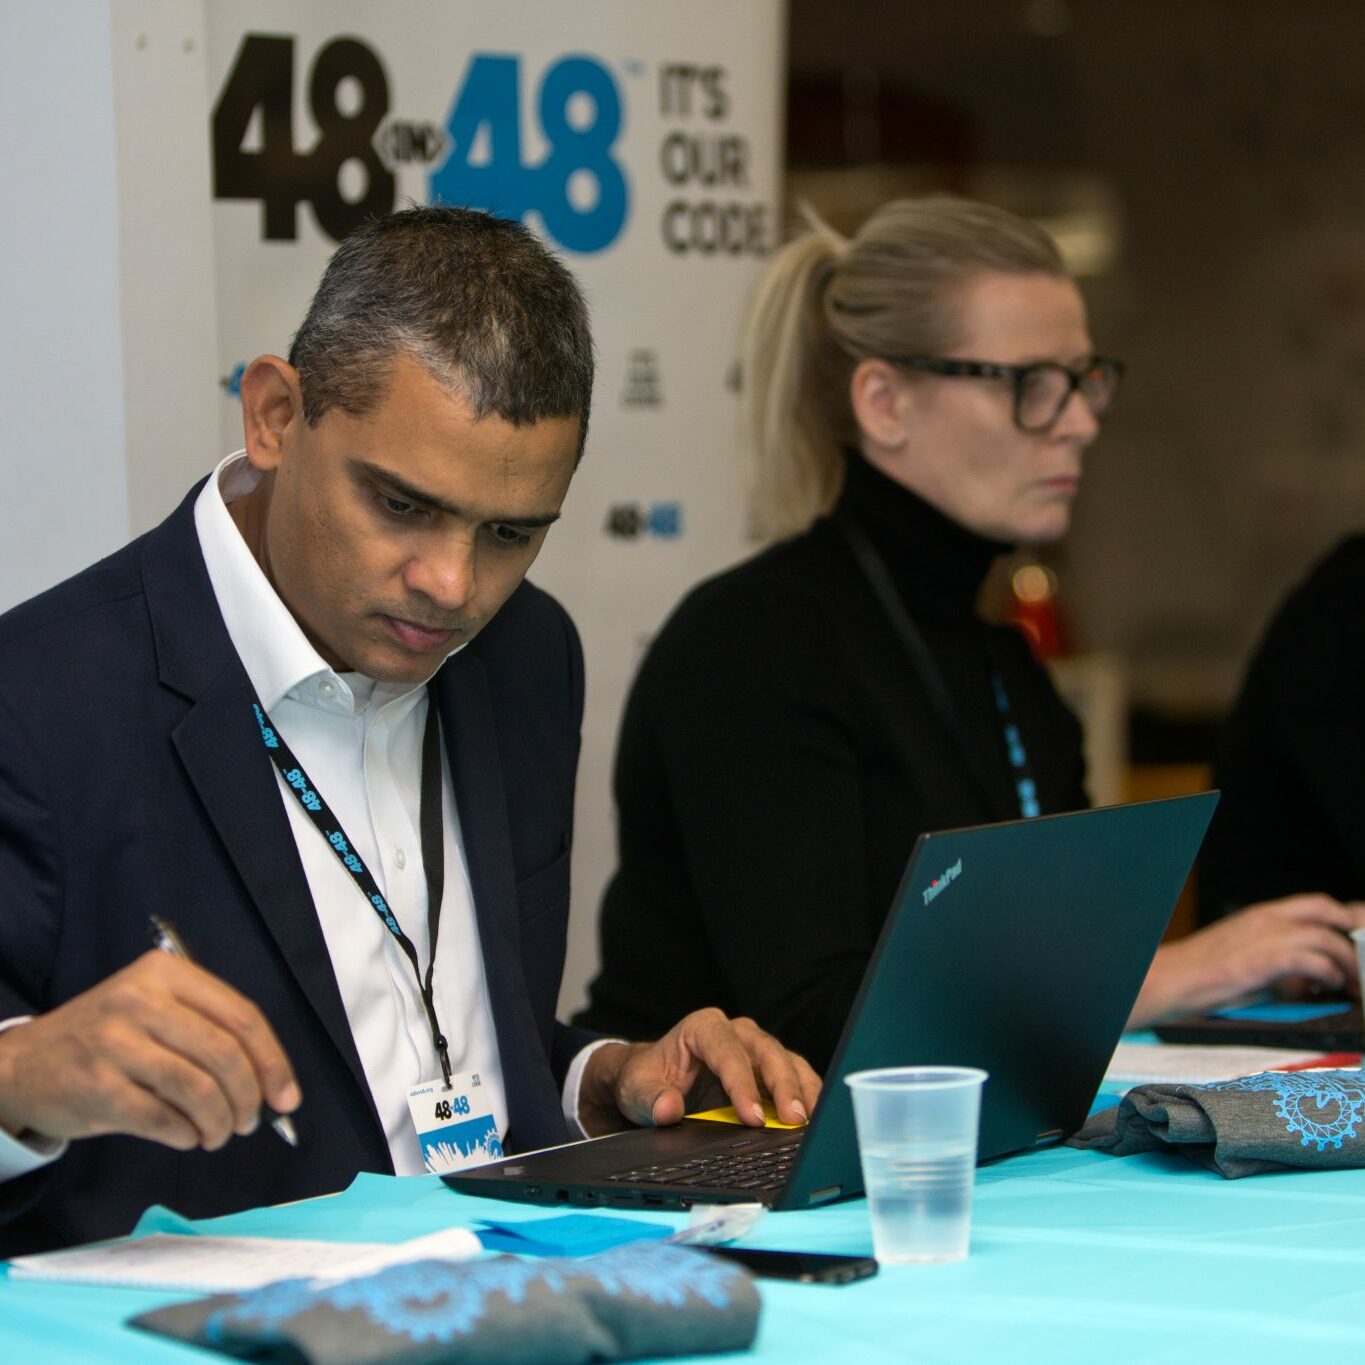 LONDON, UNITED KINGDOM - NOVEMBER 4:  Sumanth Rao (L), serving as a judge on behalf of Delta, pictured with fellow judges Andrea Moore from Red Badger, and Girish Parekh, from Cisco, during the 48in48 event, sponsored by Delta, in London, UK, on November 4, 2018. 48in48 is an event which seeks to help 48 non-profit companies better serve their communities with 48 websites, all in 48 hours, and all with the help of volunteers.